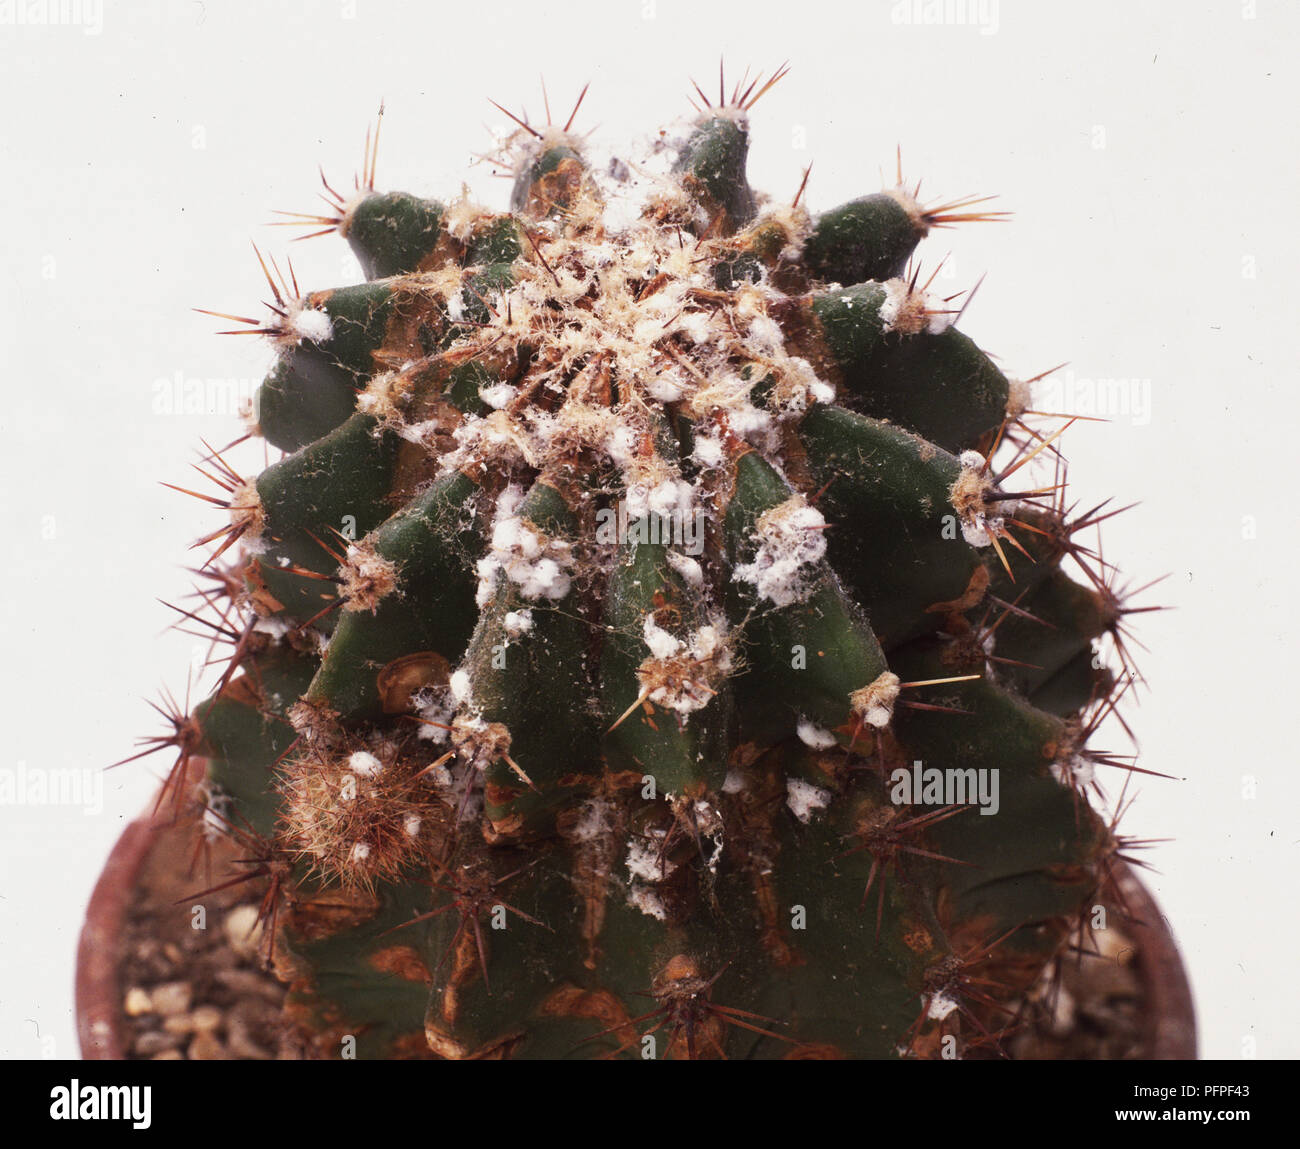 Cactus infested with mealy bugs Stock Photo